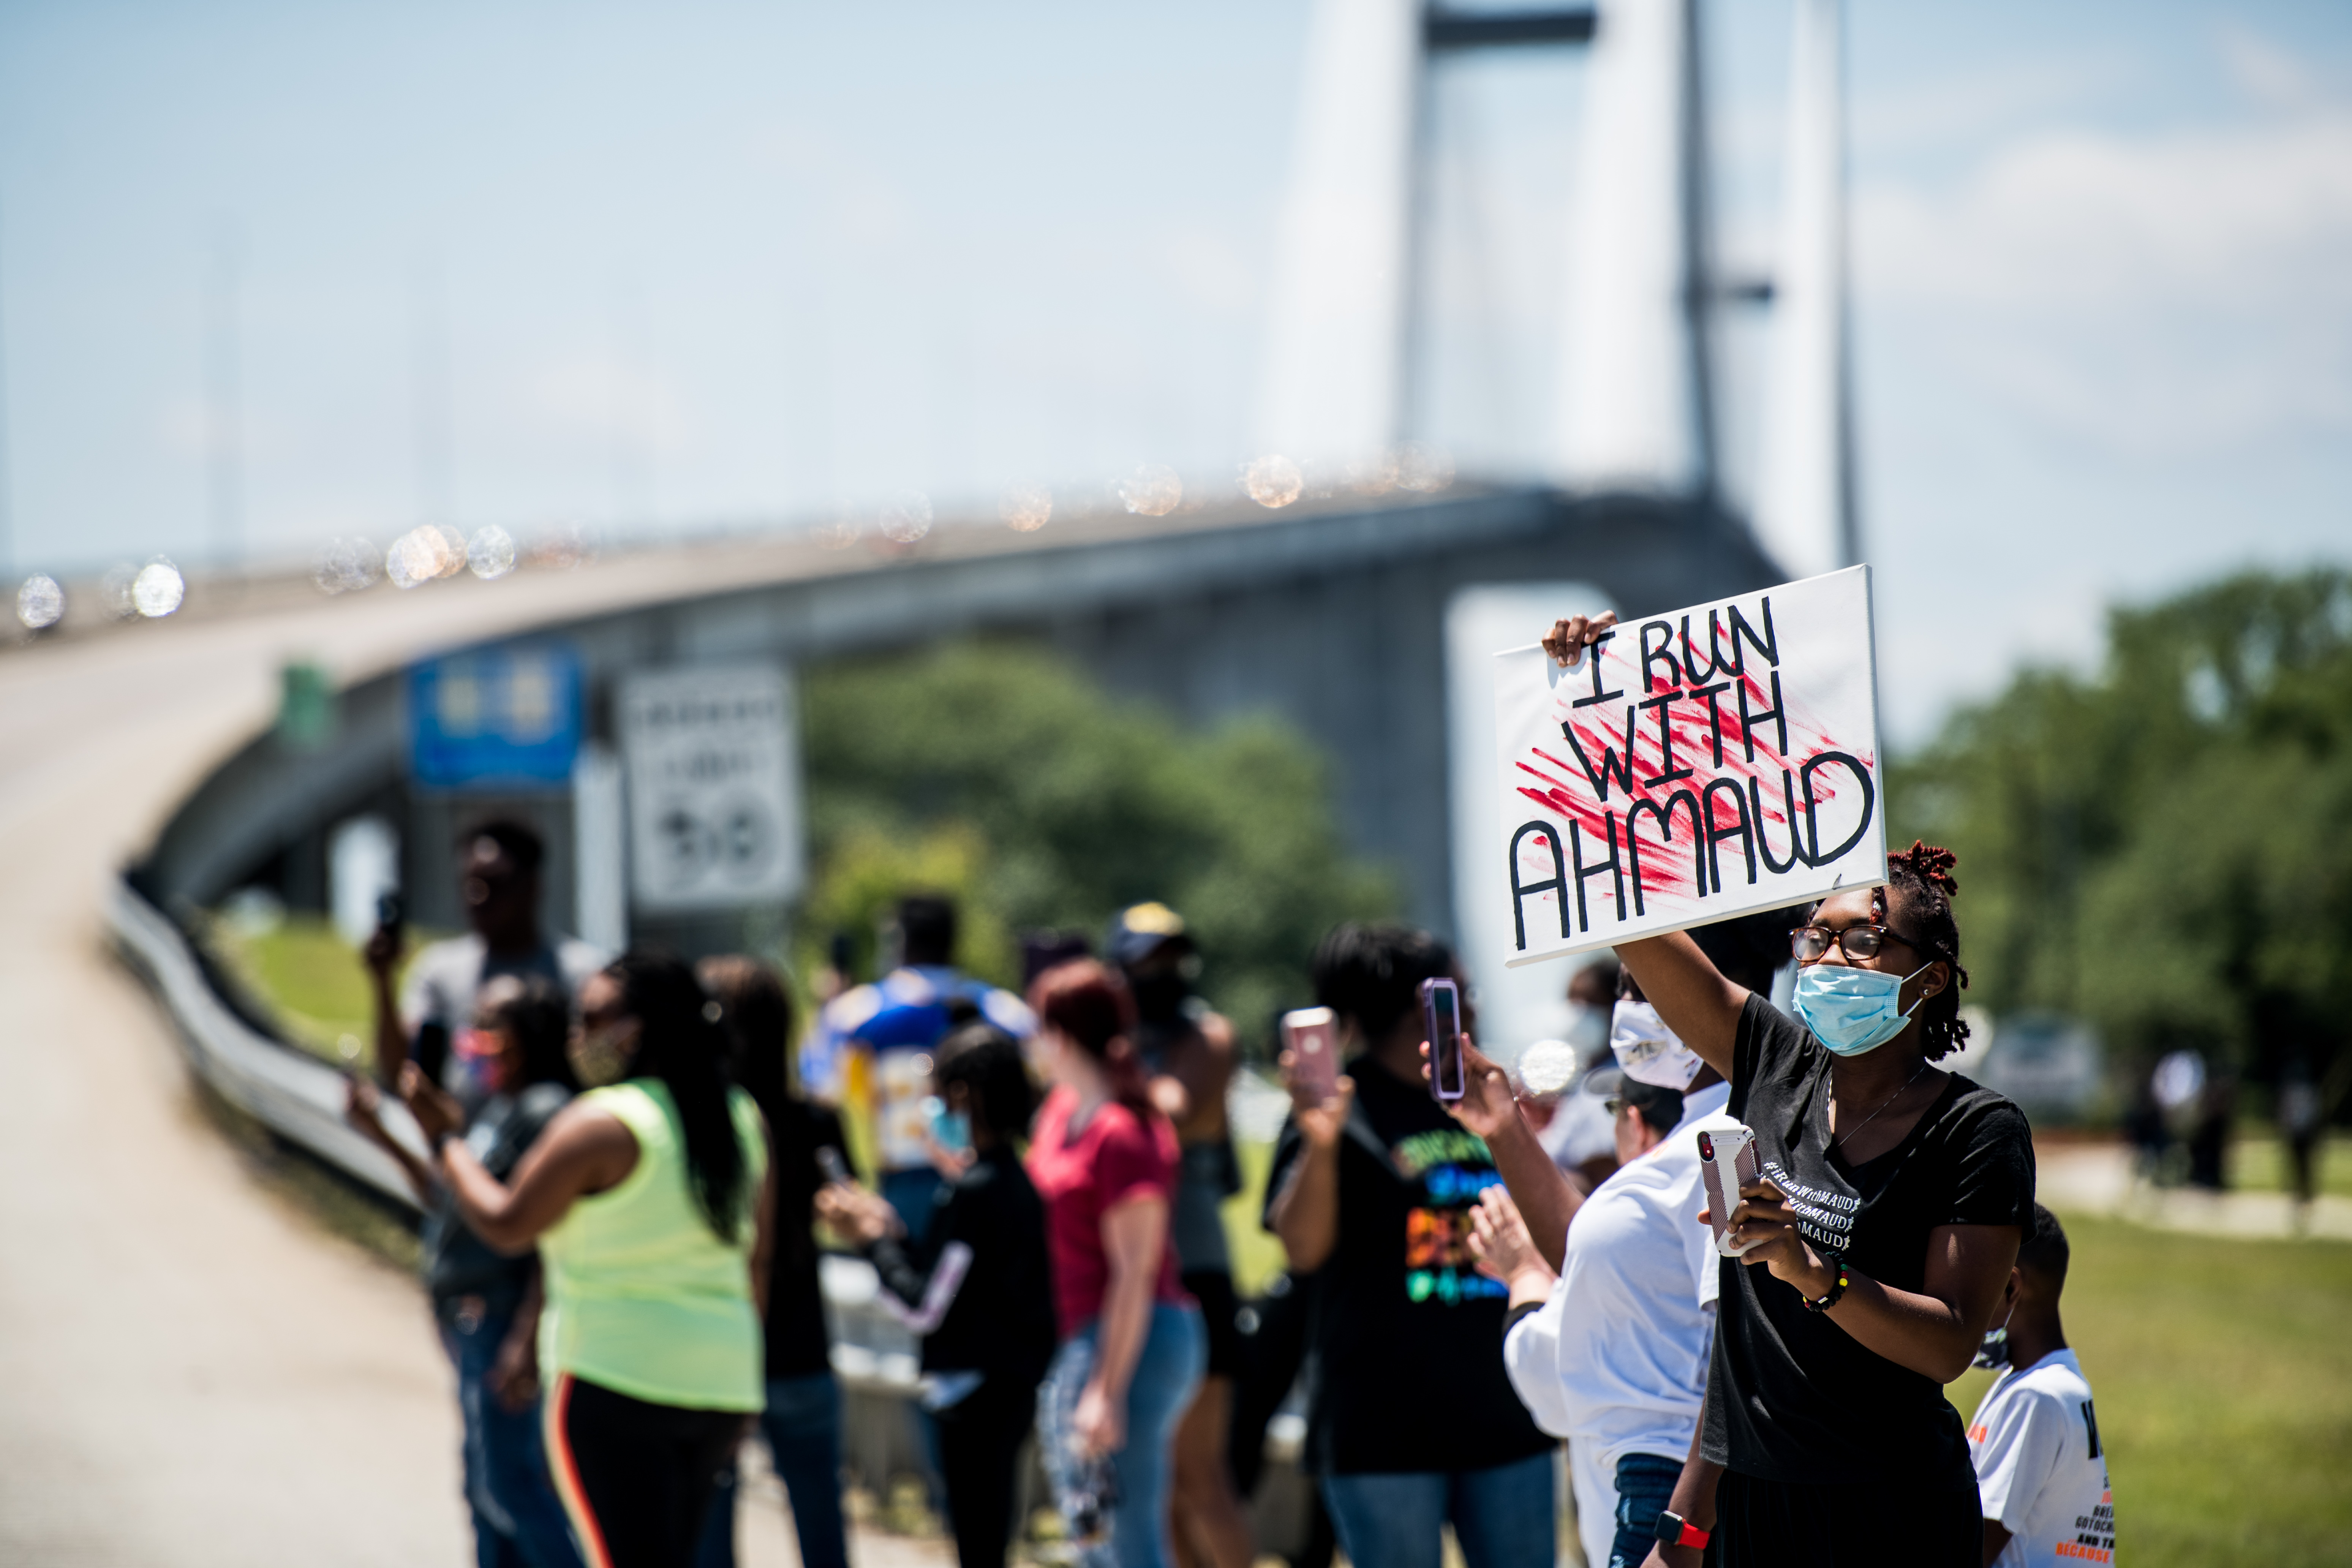 Demonstrators watch a parade of passing motorcyclists riding in honor of Ahmaud Arbery at Sidney Lanier Park on May 9, 2020 in Brunswick, Georgia. (Photo by Sean Rayford/Getty Images)